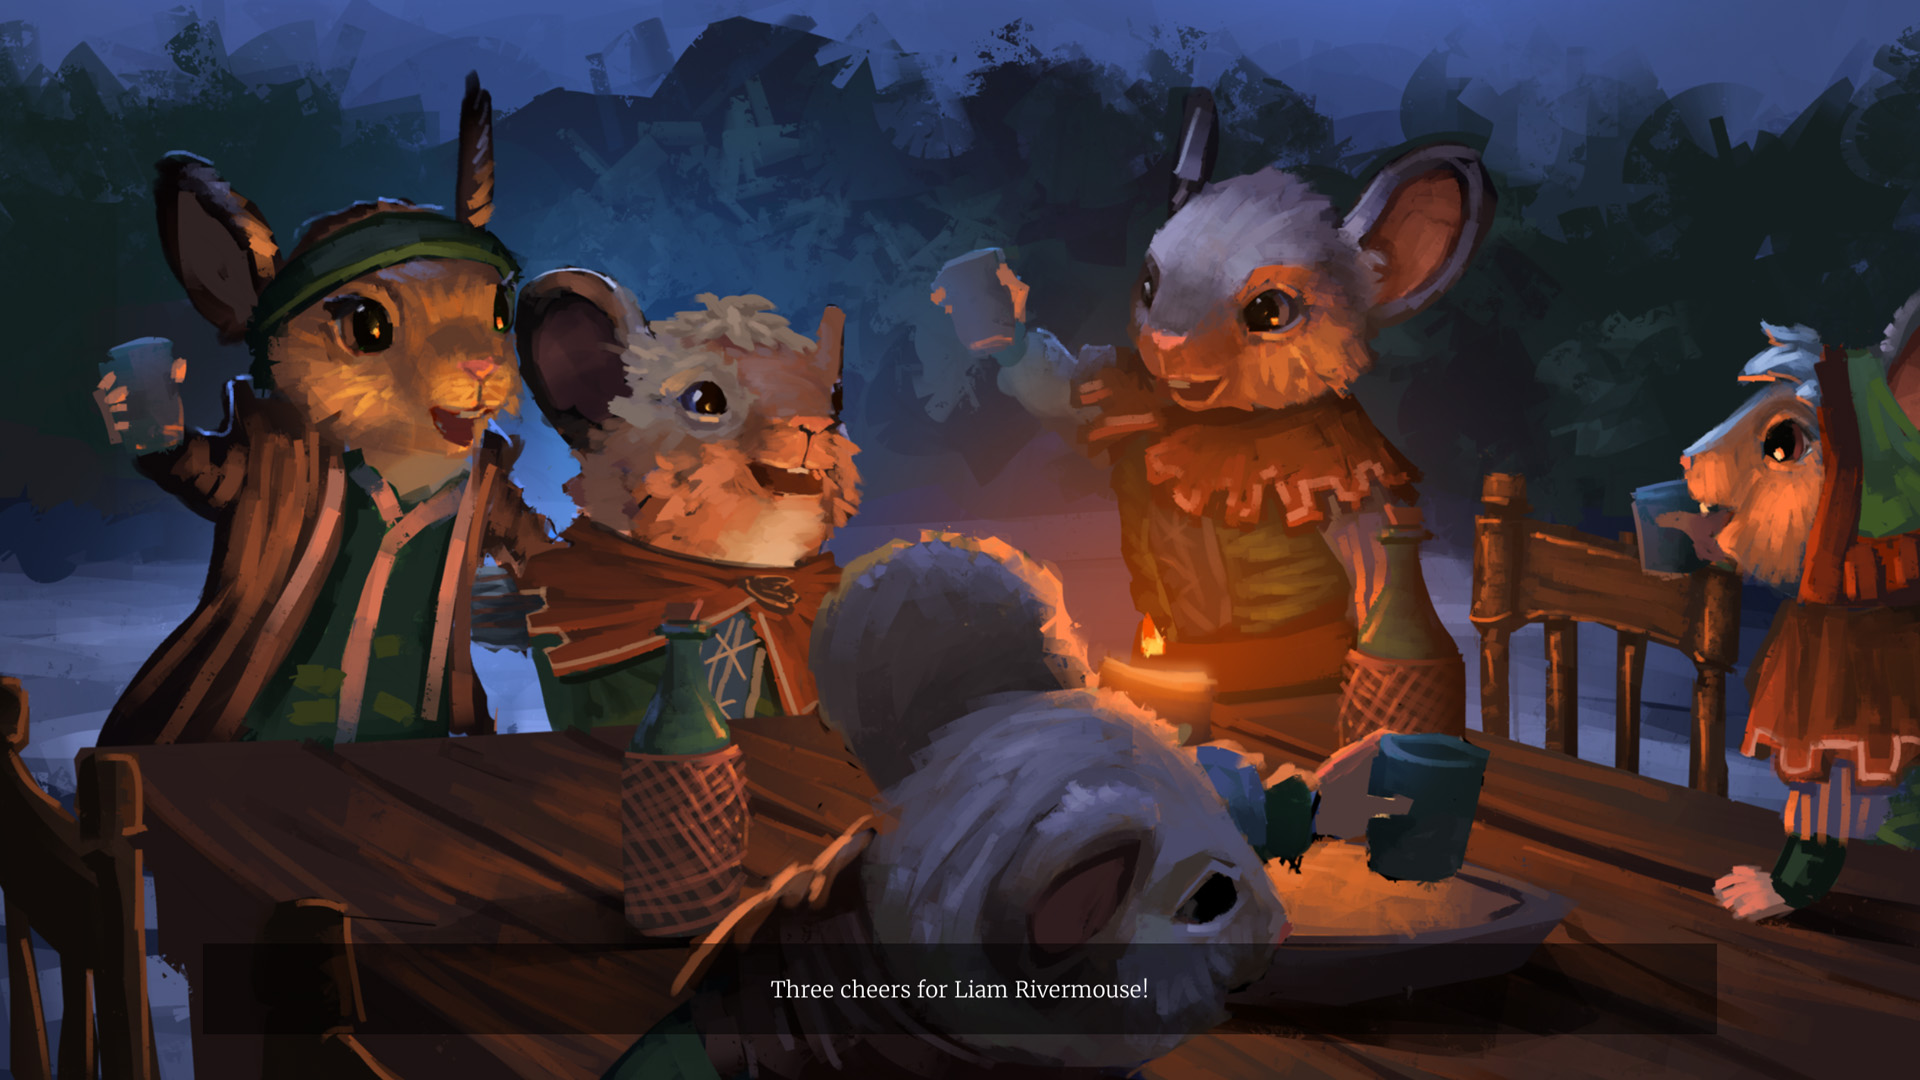 The lost legends of redwall. Рэдволл. Redwall Scout. The Lost Legends of Redwall гиганты.